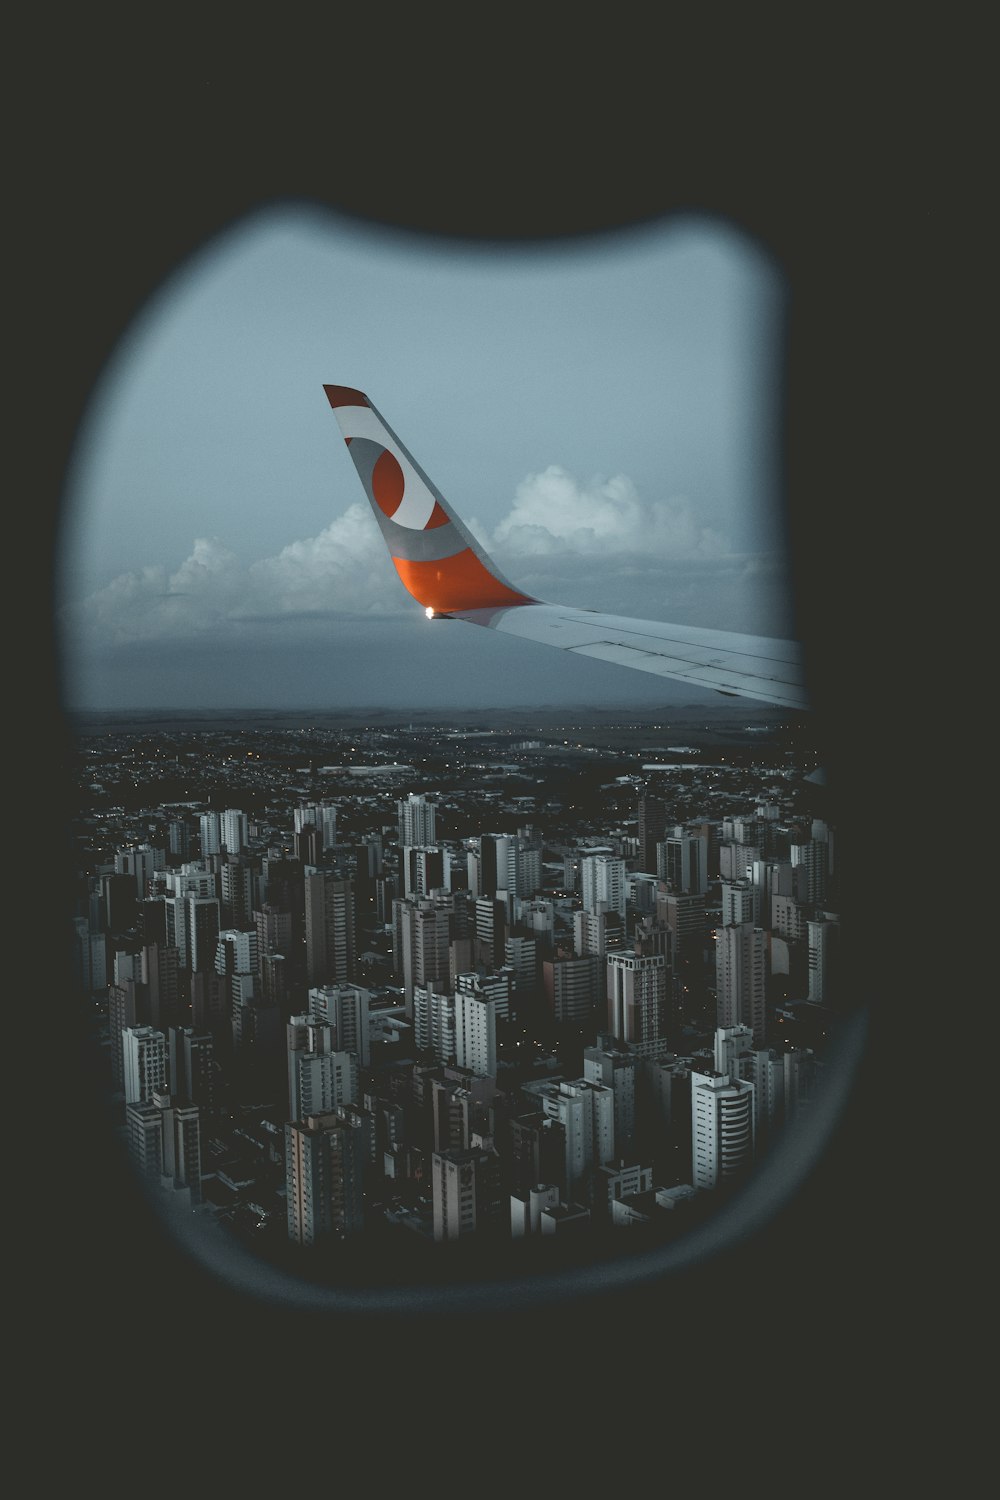 orange and gray plane winged flying on air during daytime